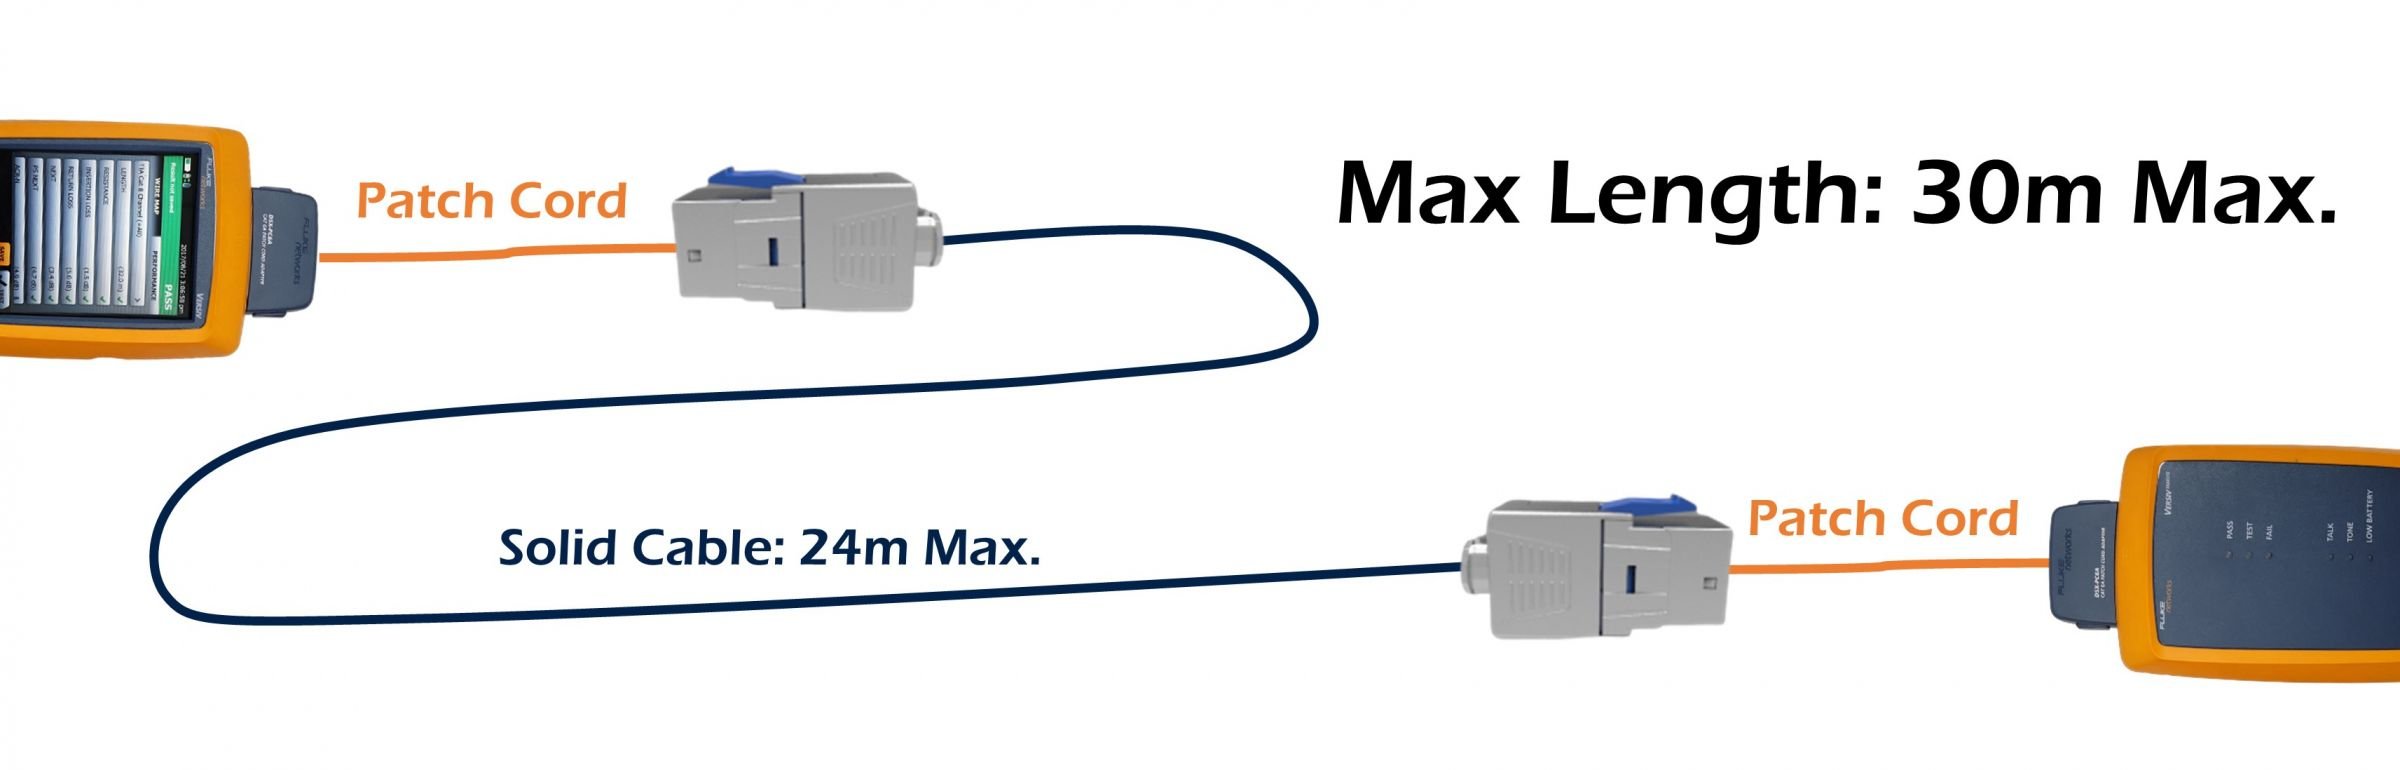 Cat.8 Internet Cable Max Channel Length